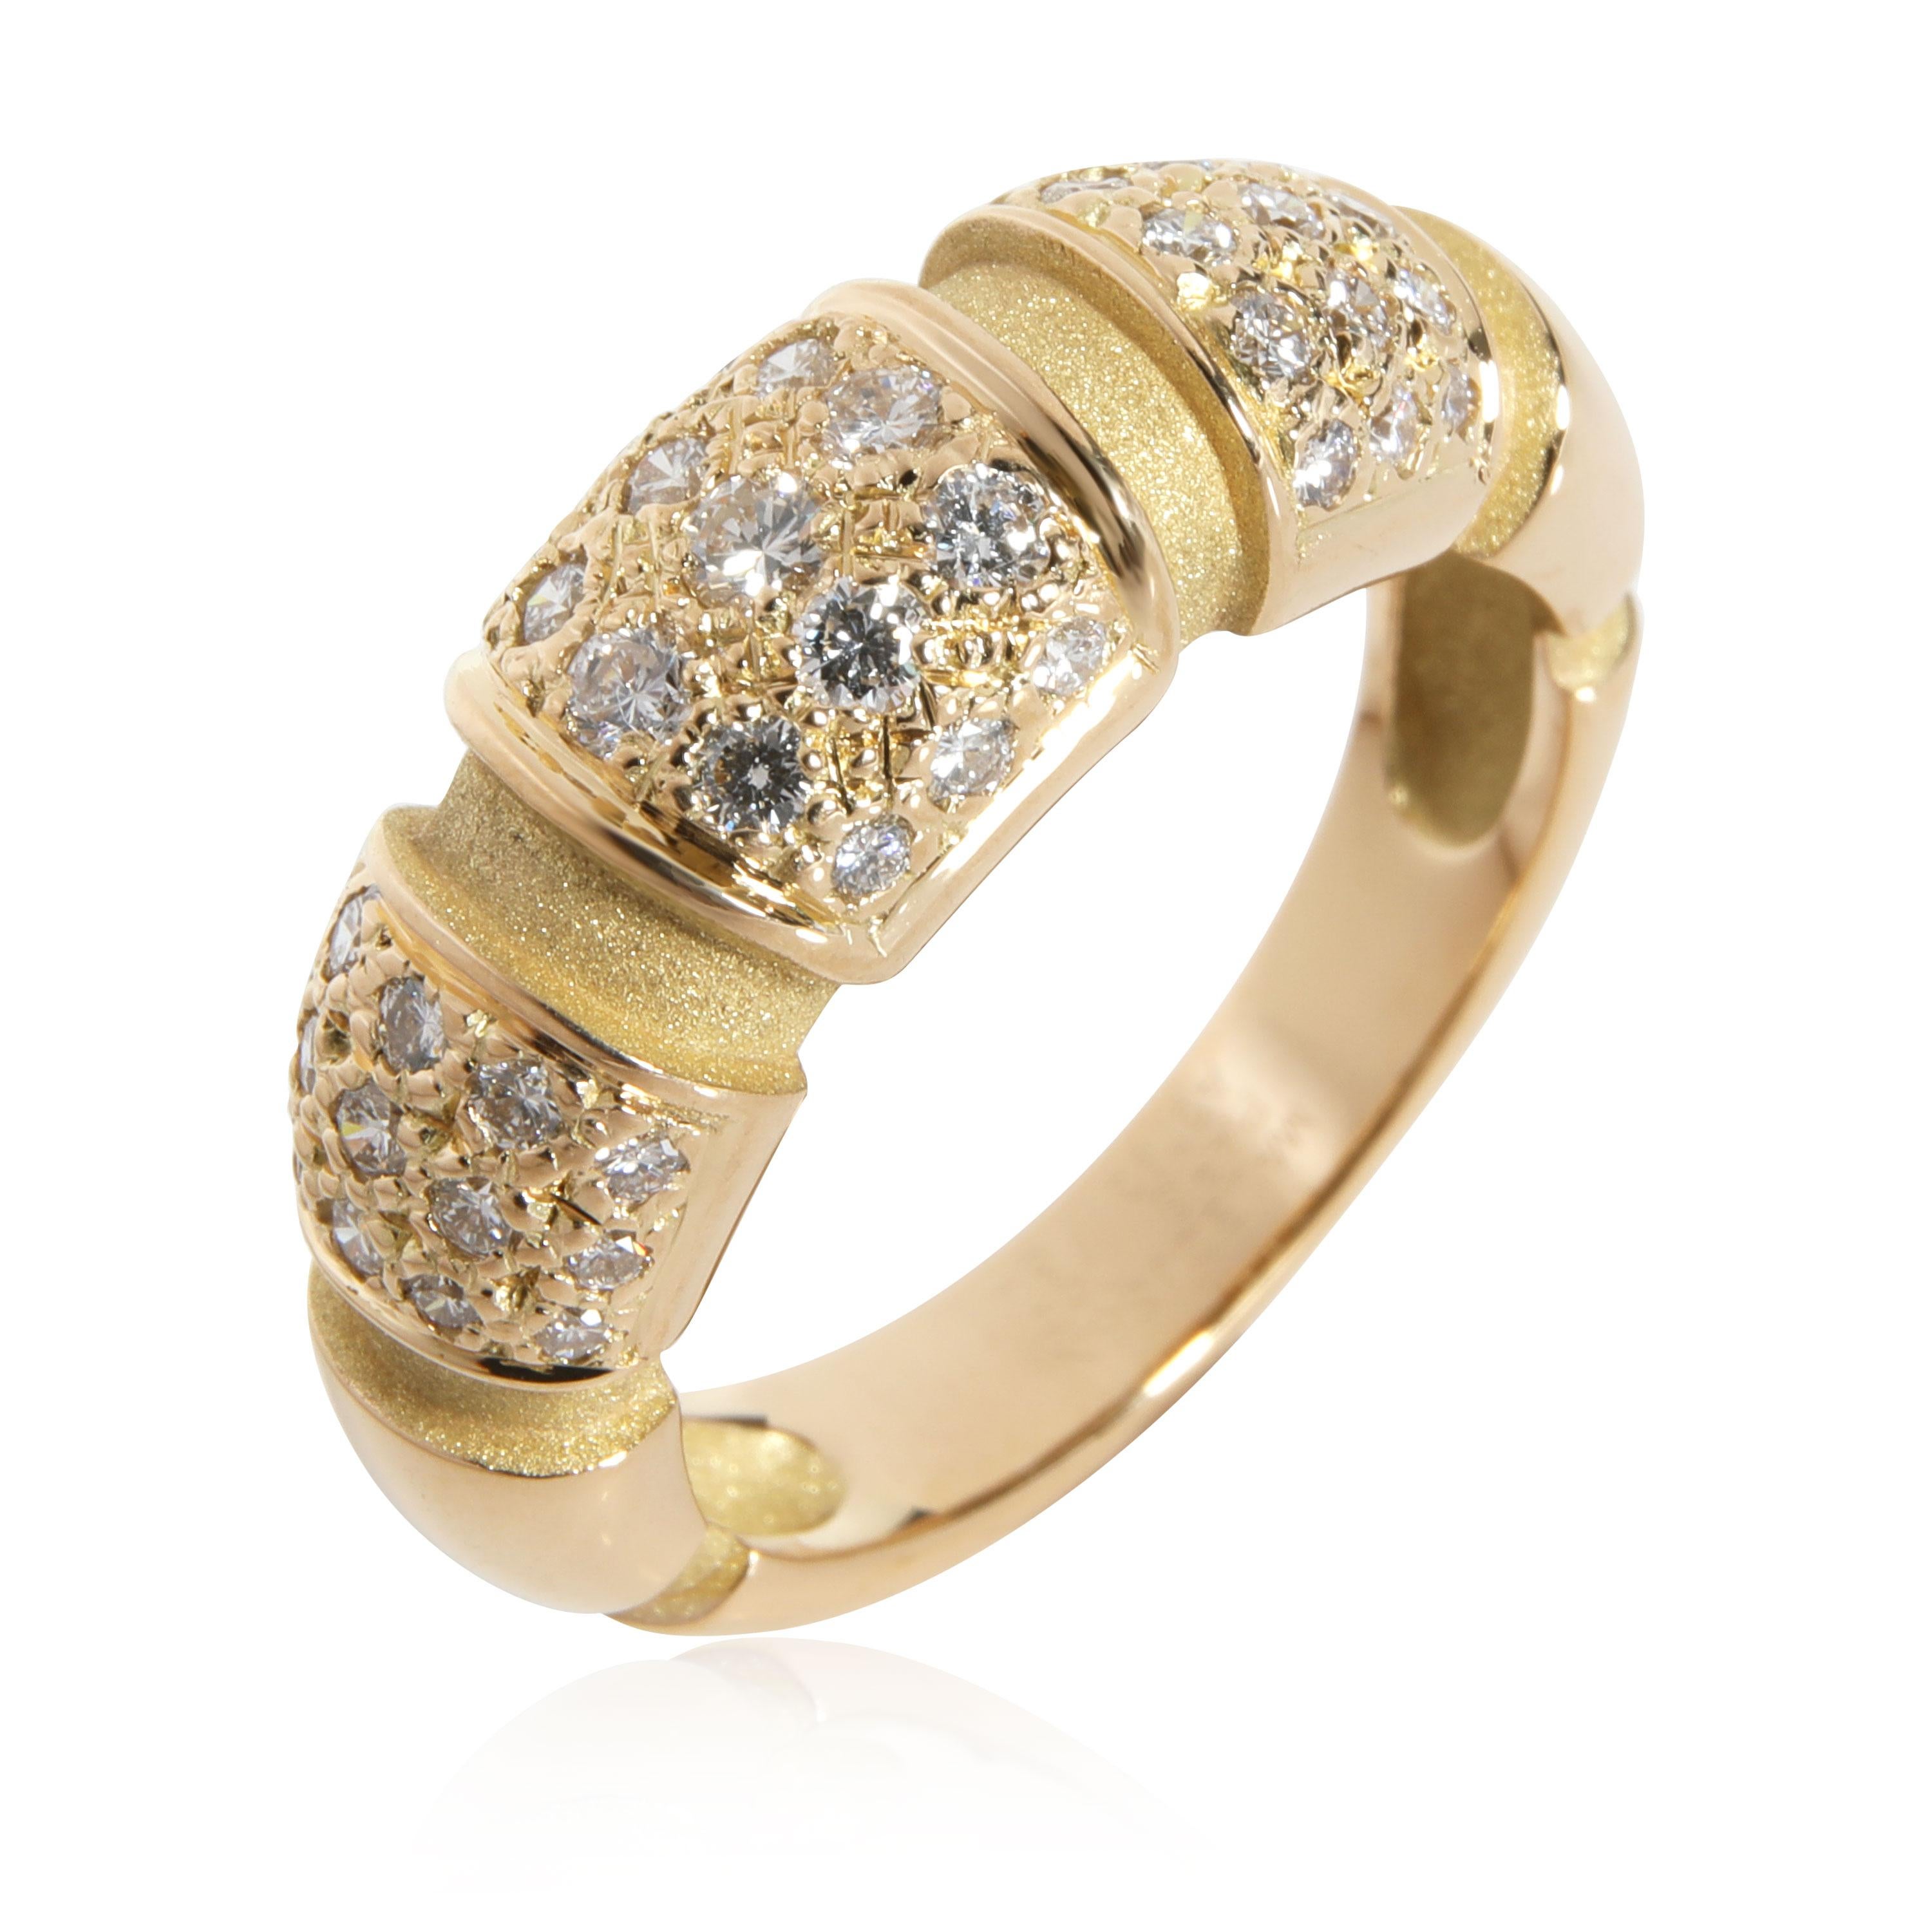 Mauboussin Nadja Diamond Ring in 18k Yellow Gold 0.79 CTW

PRIMARY DETAILS
SKU: 112132
Listing Title: Mauboussin Nadja Diamond Ring in 18k Yellow Gold 0.79 CTW
Condition Description: Retails for 5,500 USD. In excellent condition and recently